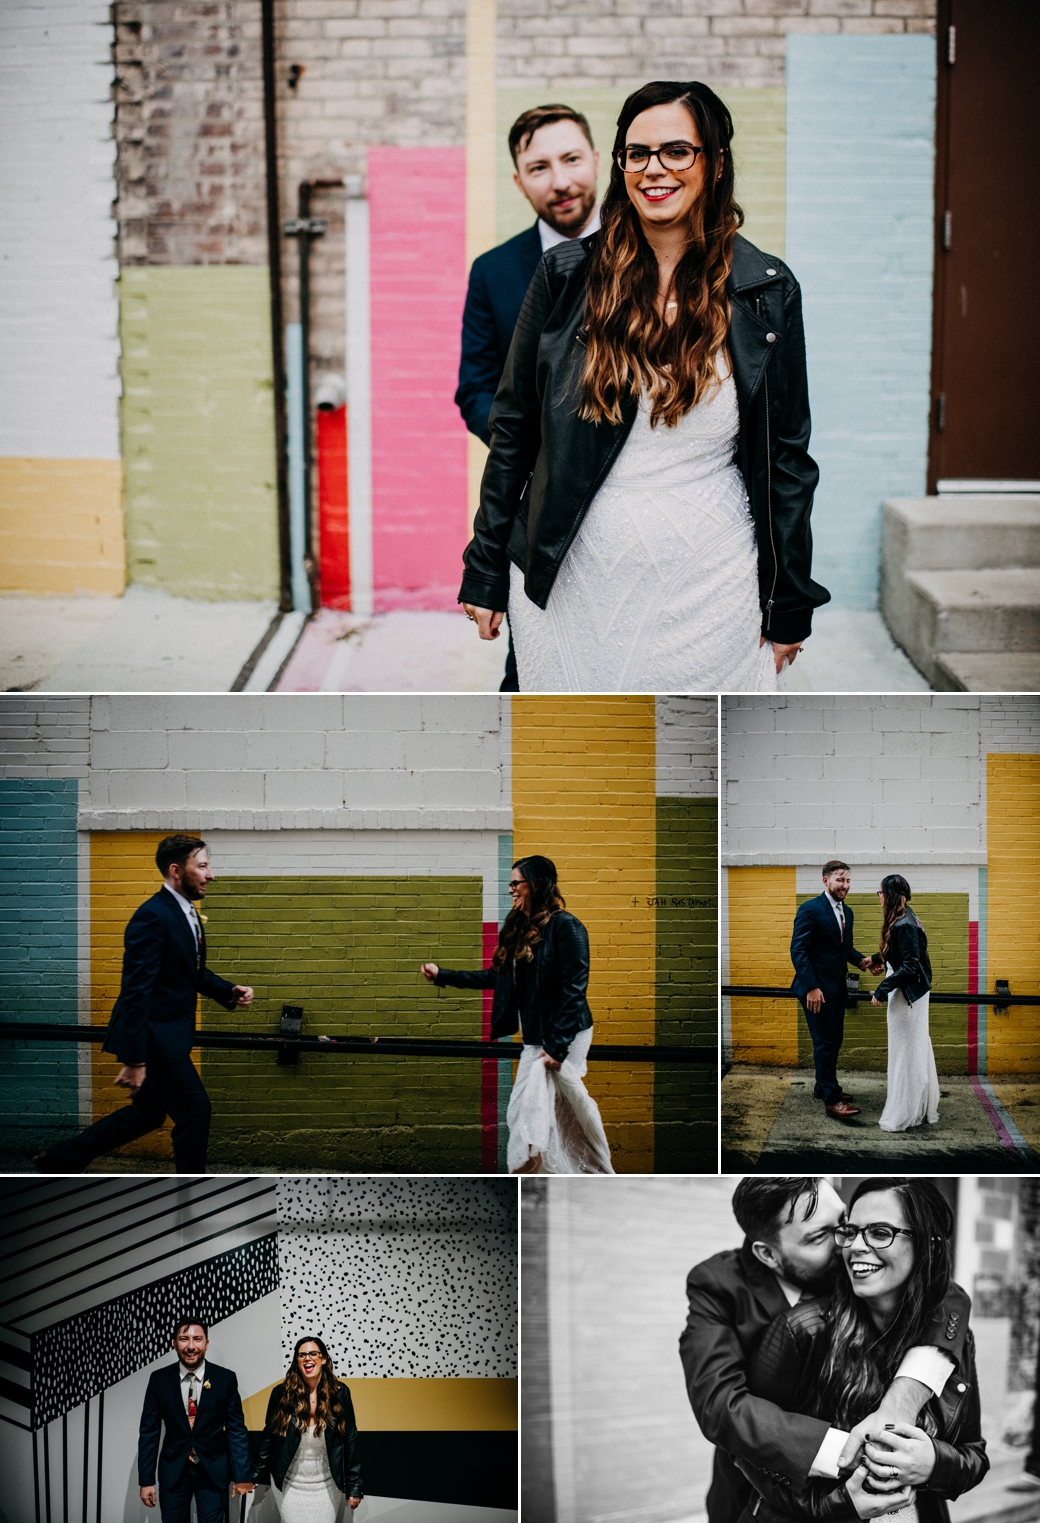 A bride and groom pose for photos in front of a colorful wall in an alley near the Fox theatre in St. Louis Grand Arts District